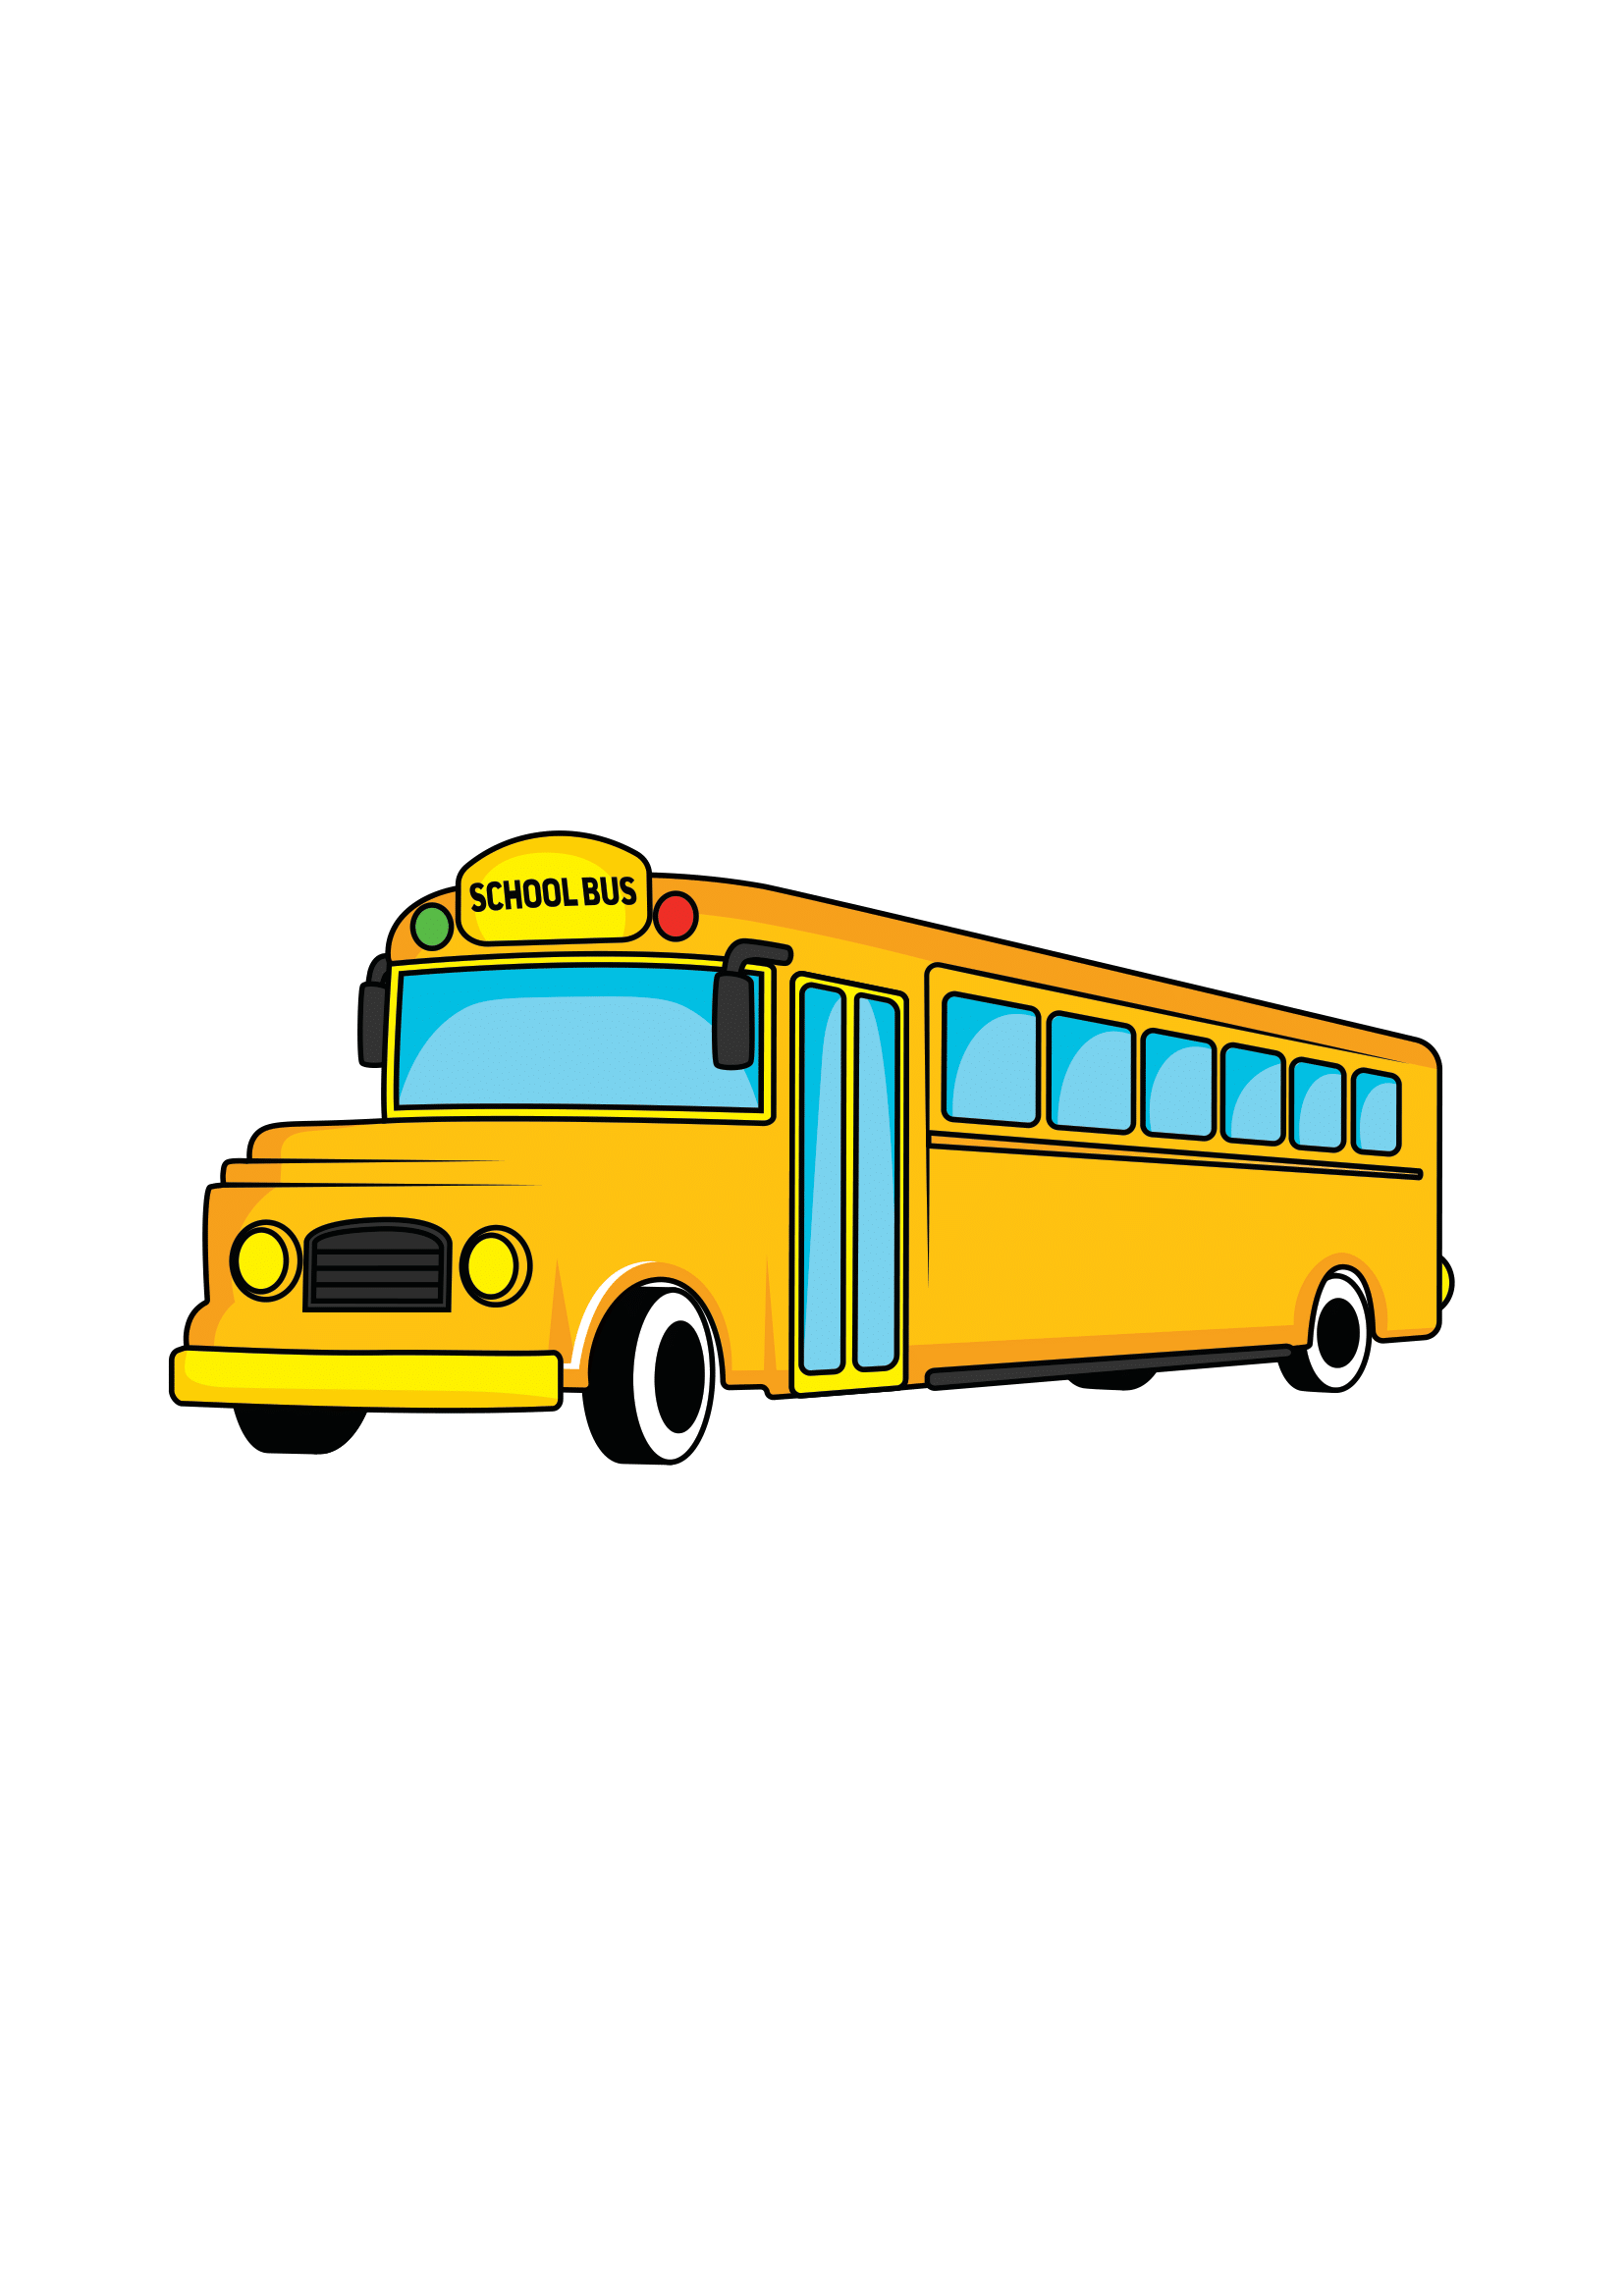 How to Draw A School Bus Step by Step Printable